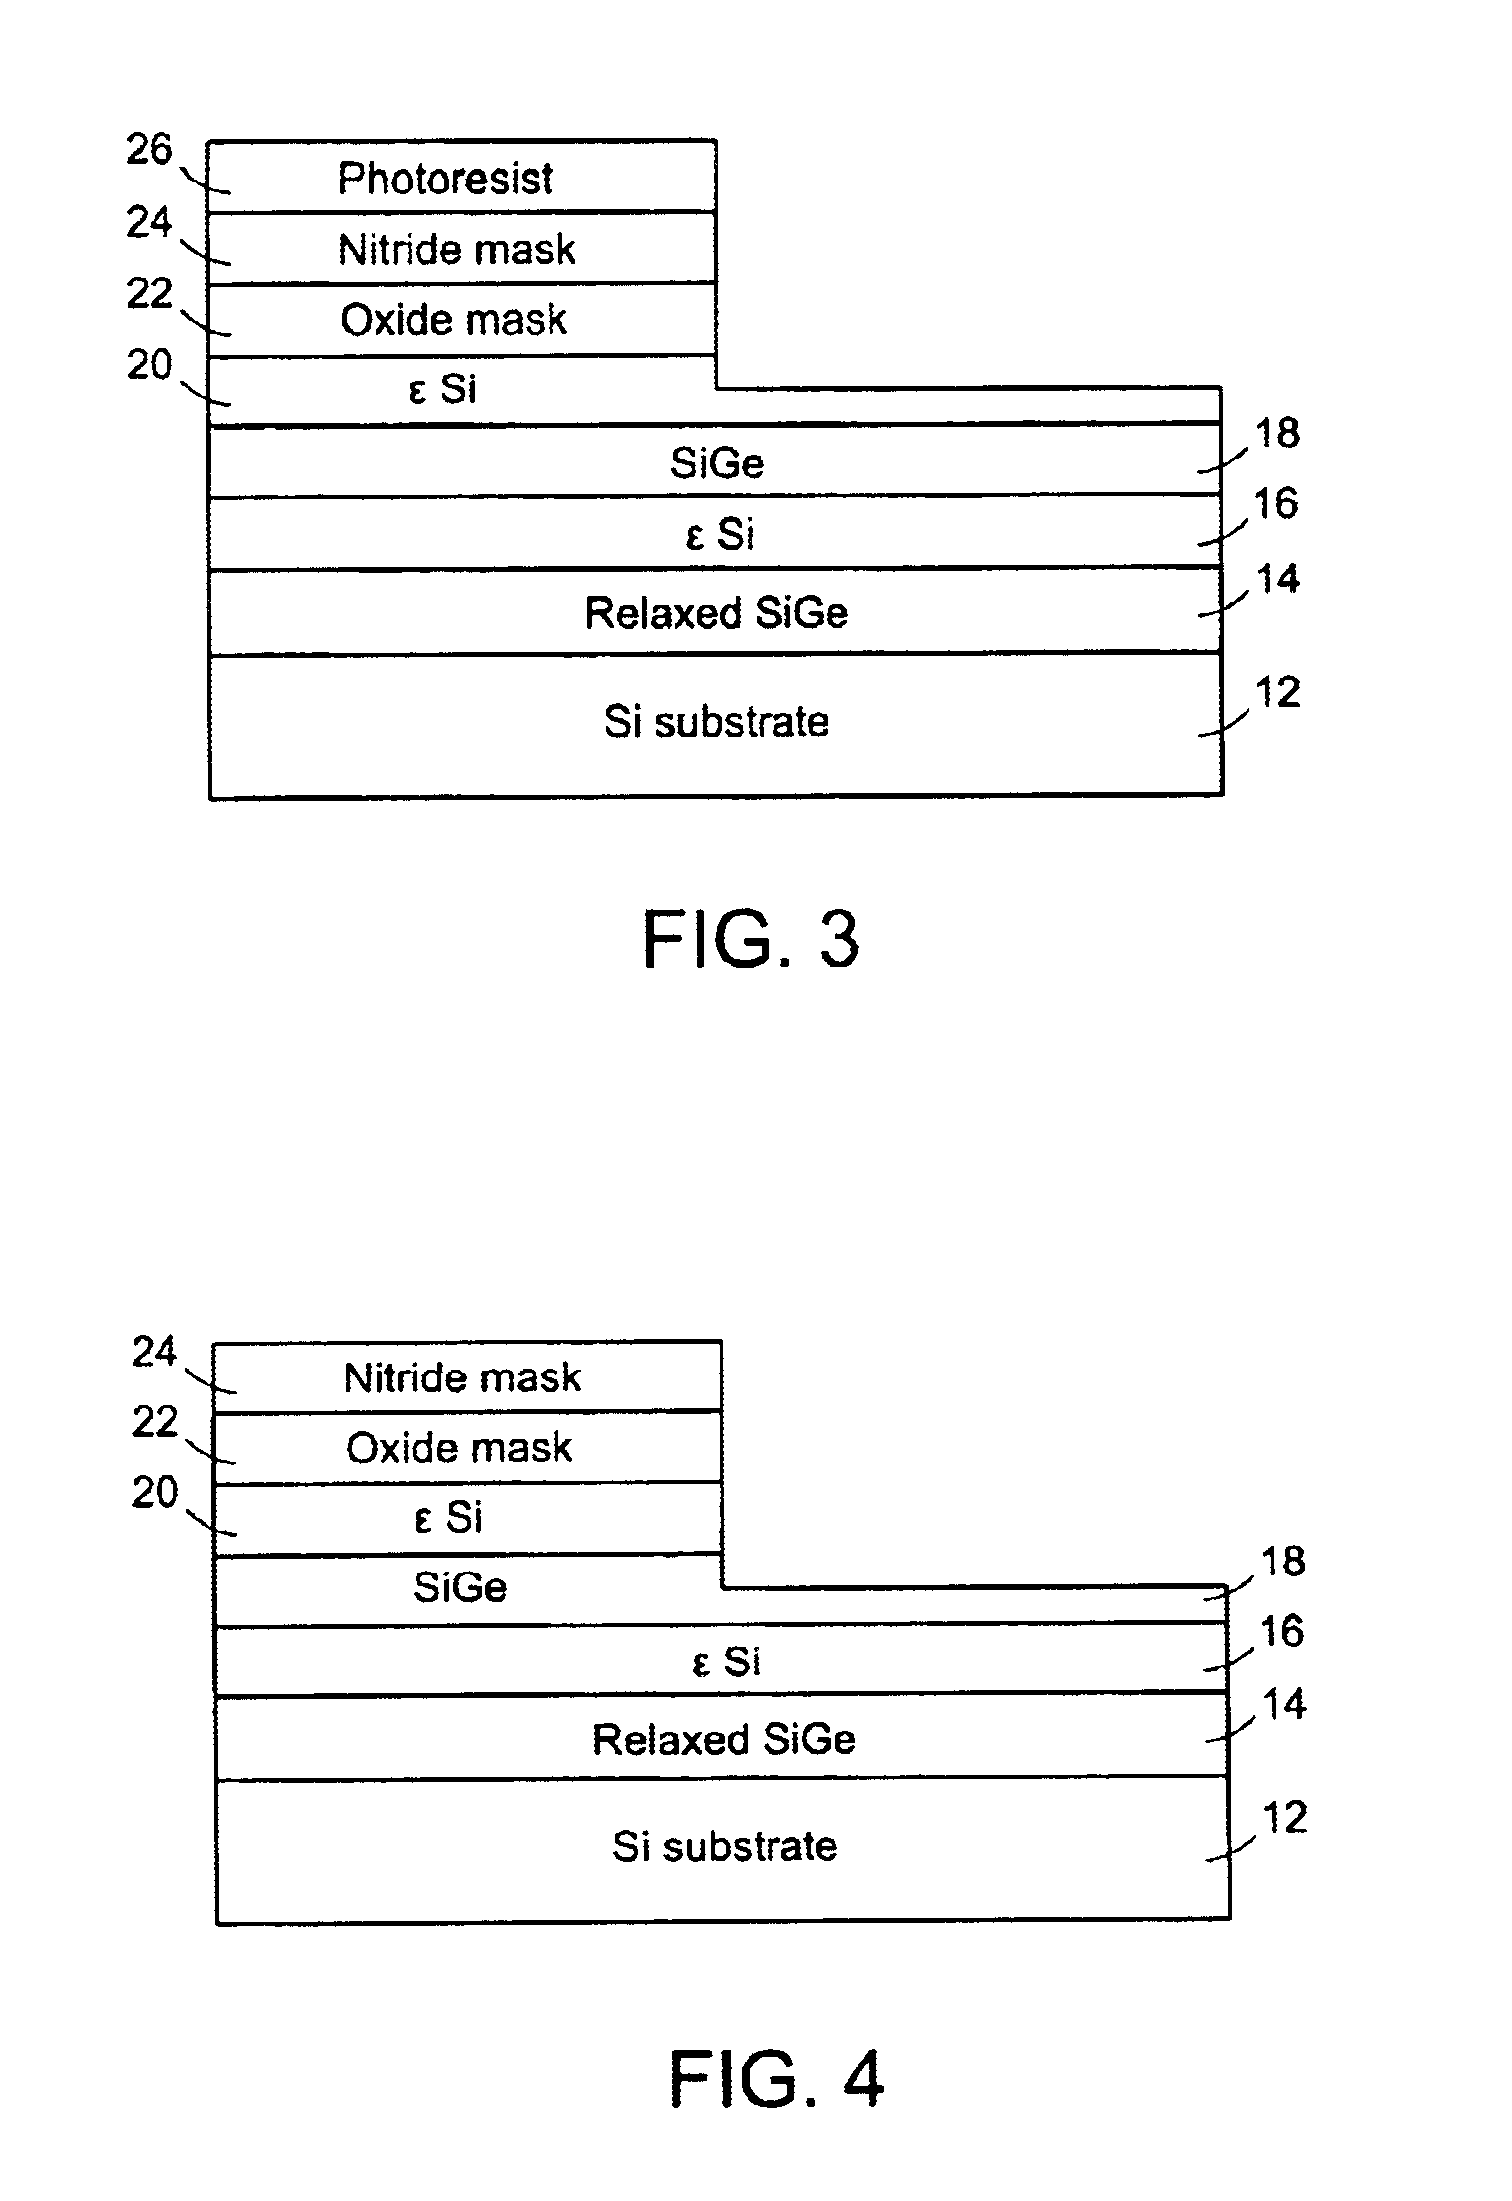 Method of selective removal of SiGe alloys